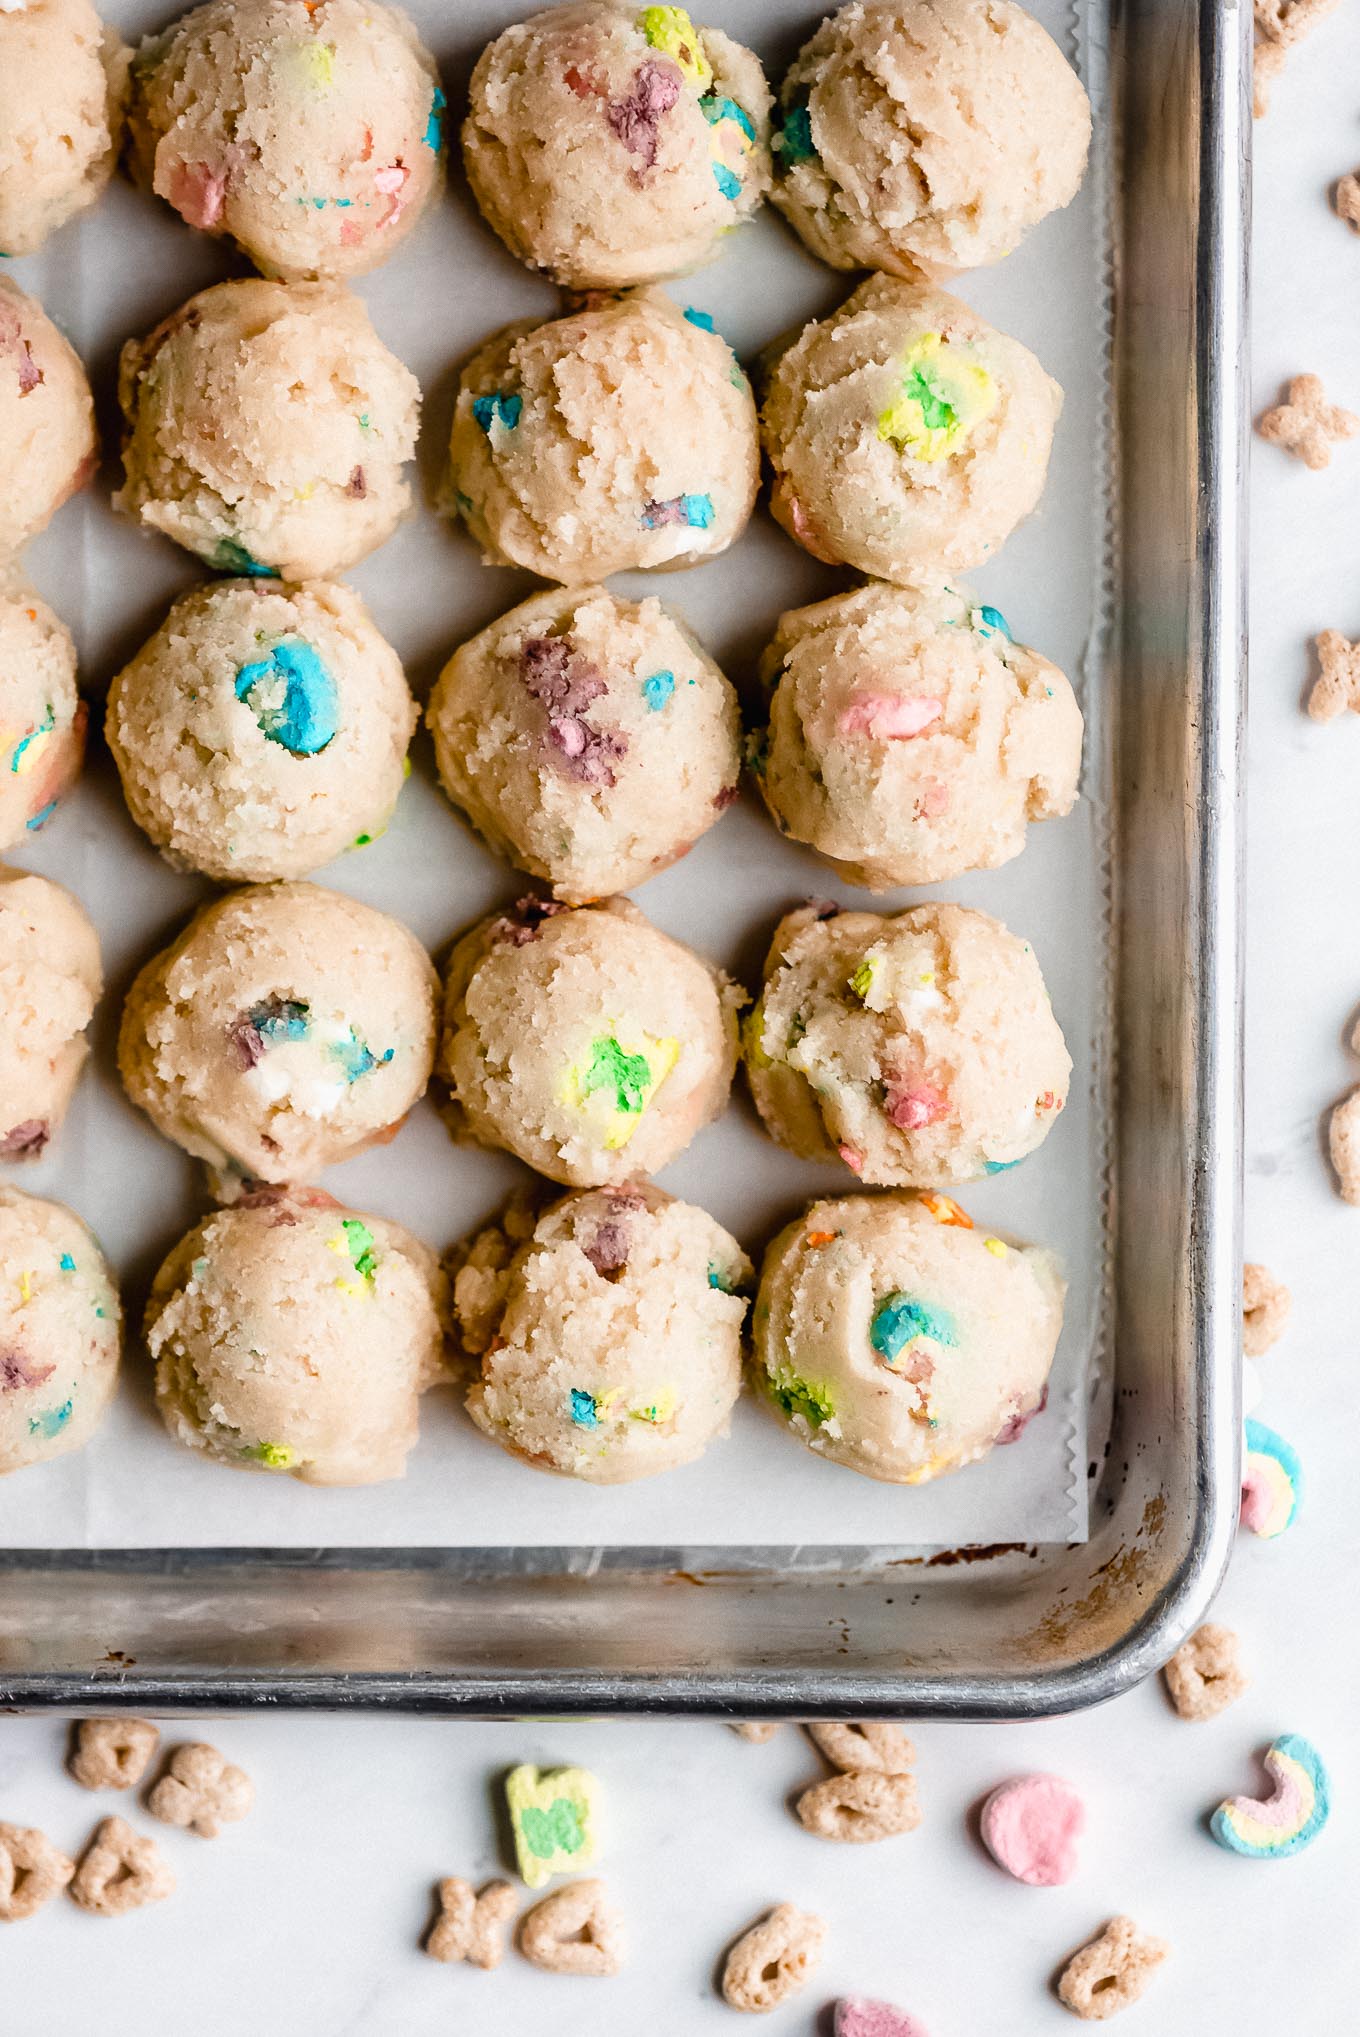 Lucky Charms Cookie Dough on a baking sheet.